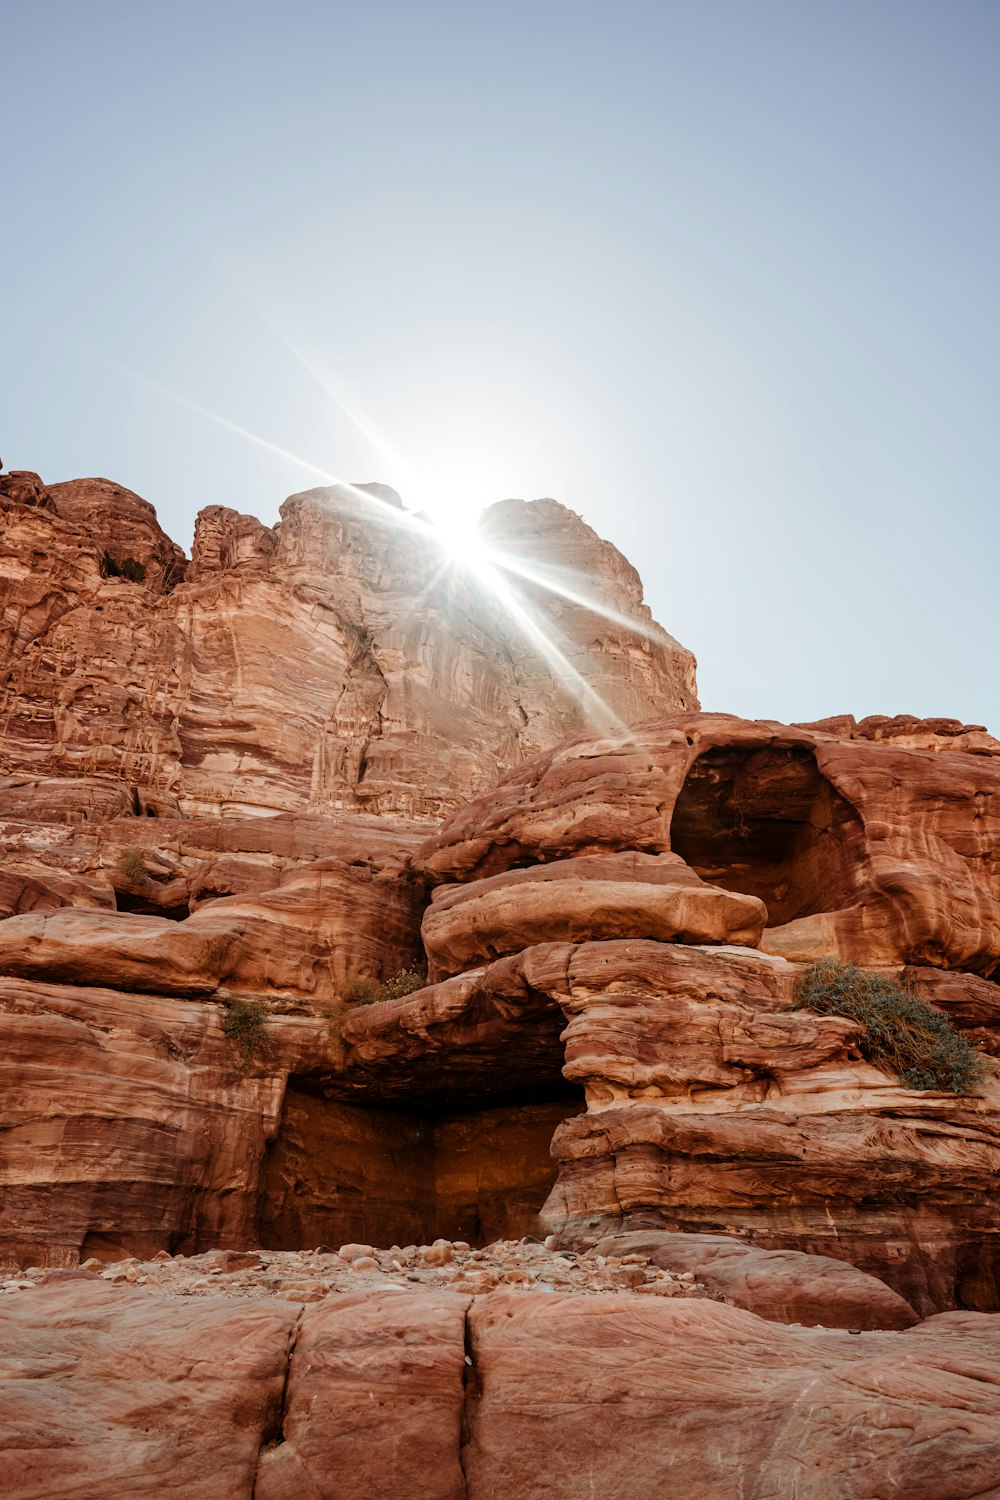 the sun shines brightly over a rocky outcropping